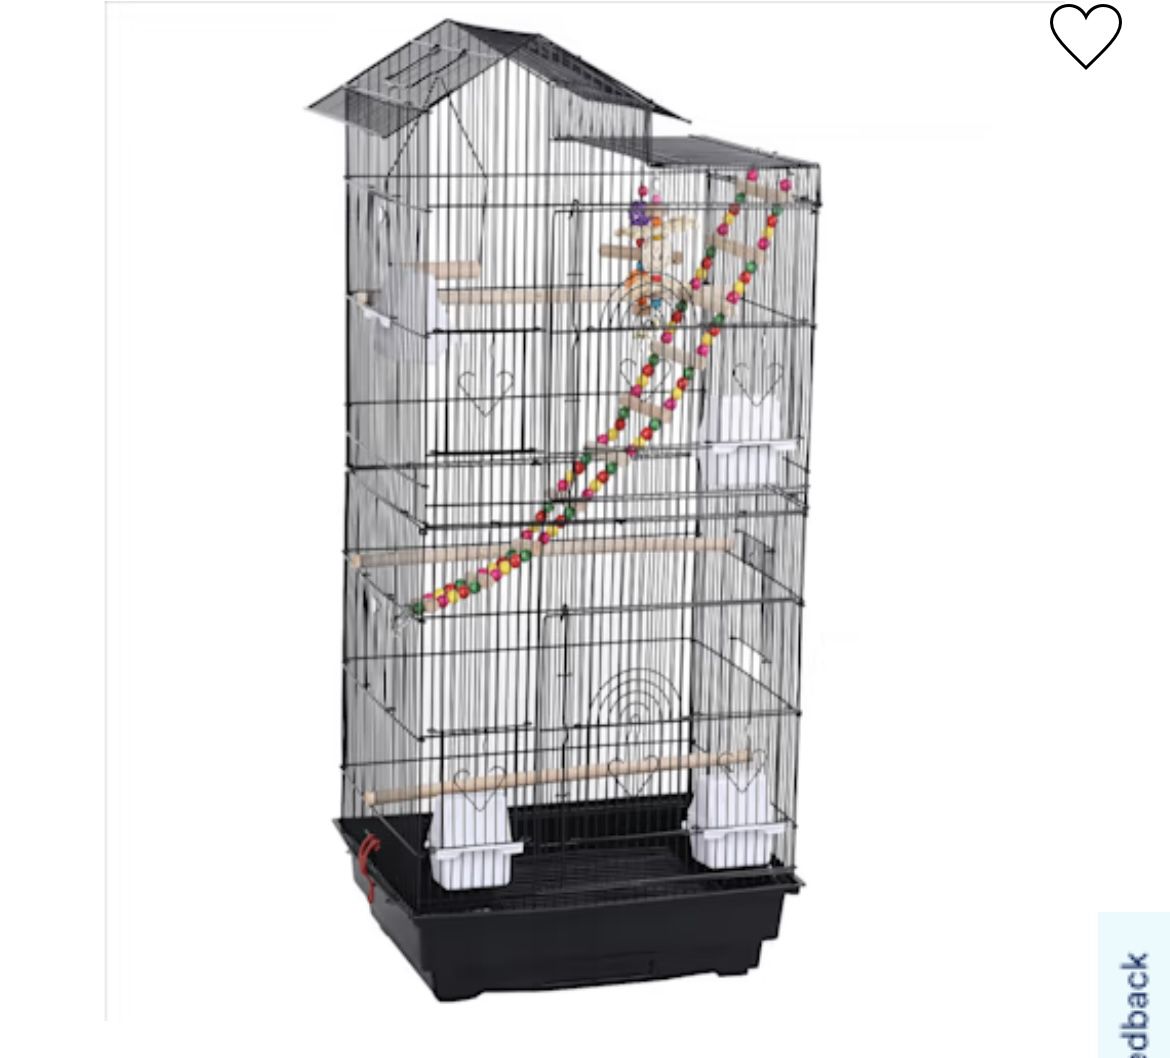 Brand NEW Fully Assembled Metal Bird Cage with Swing Ladder, 18” L, 14” W, 39" H